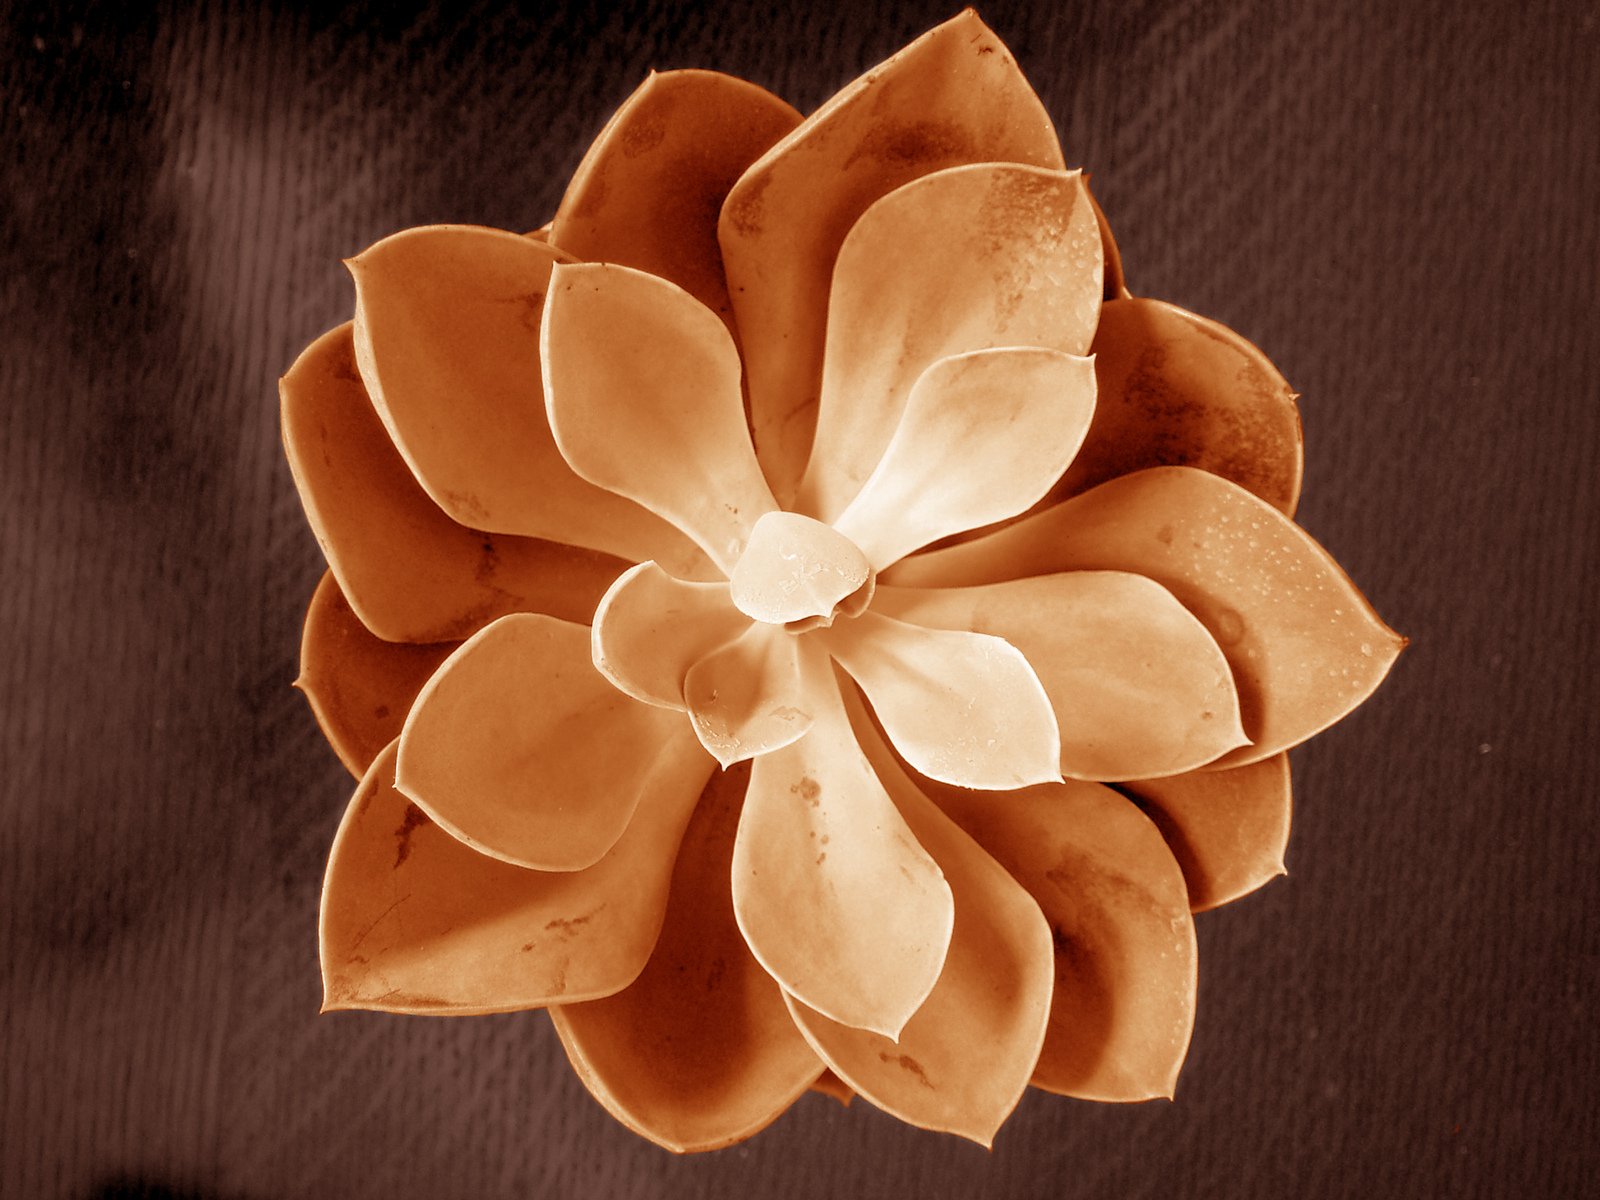 a flower is shown on an abstract brown background